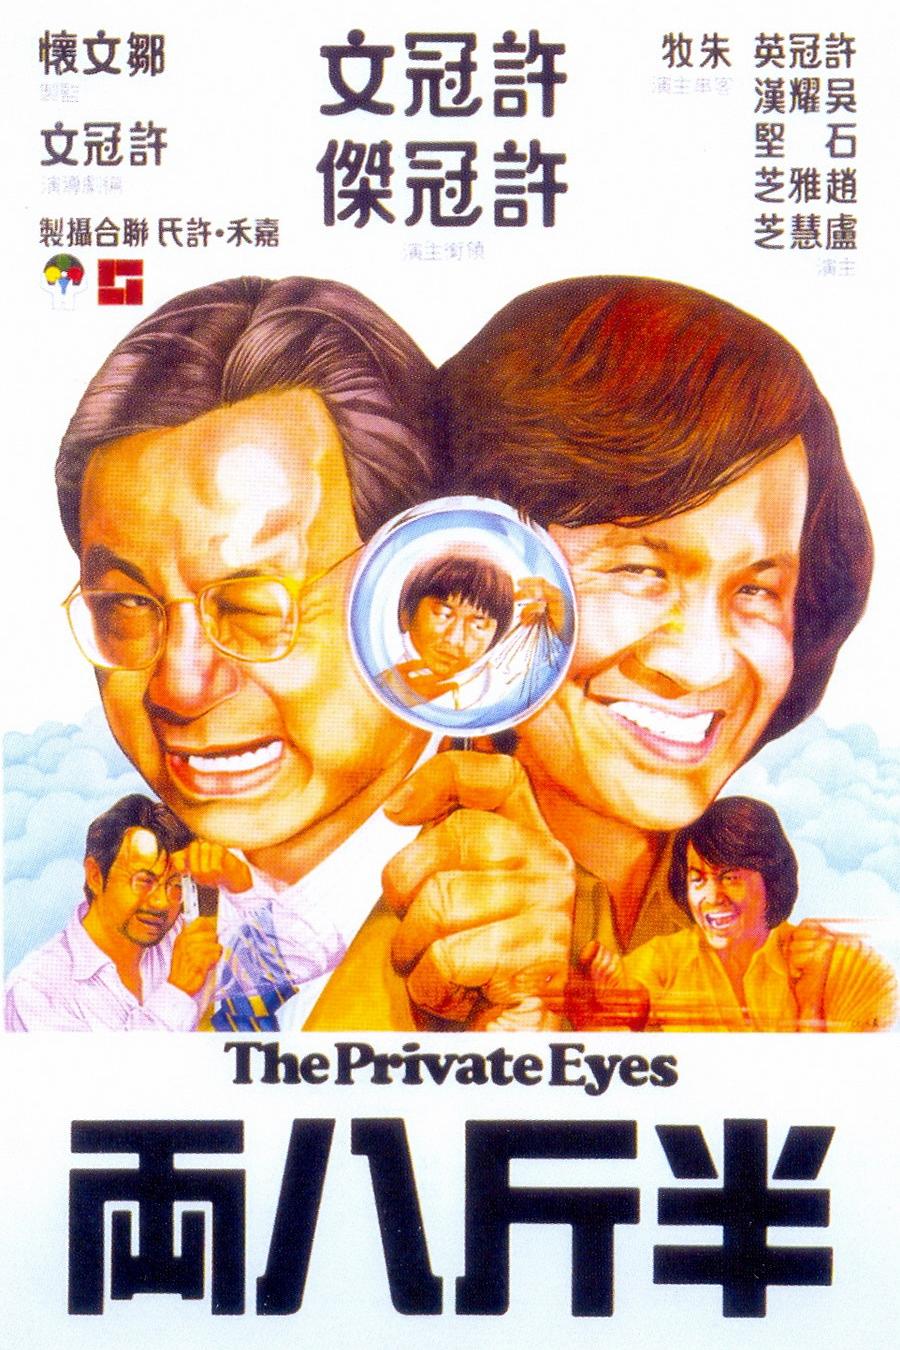 ˃ The.Private.Eyes.1976.MANDARiN.DUBBED.1080p.BluRay.x264-REGRET 6.56GB-1.png